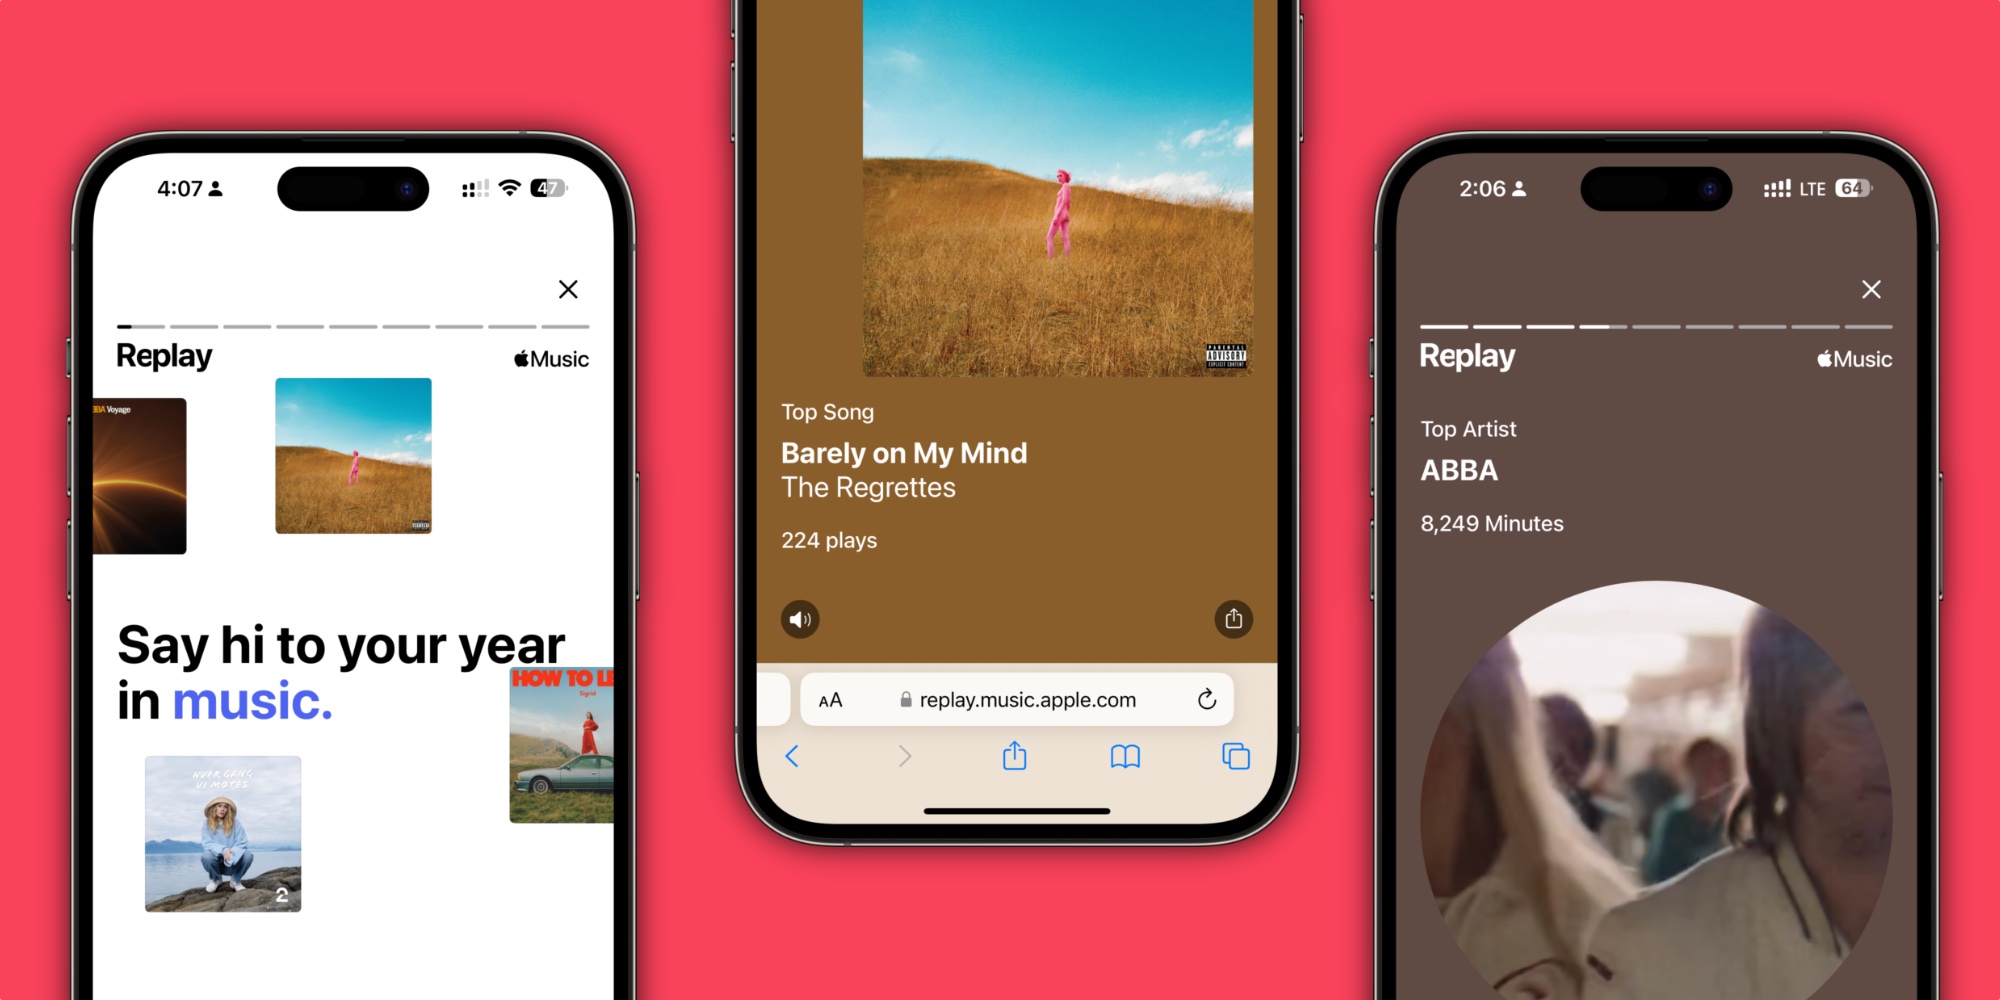 Apple Music Replay 2022 gets a revamp with Instagram-like reels, here’s how to share yours